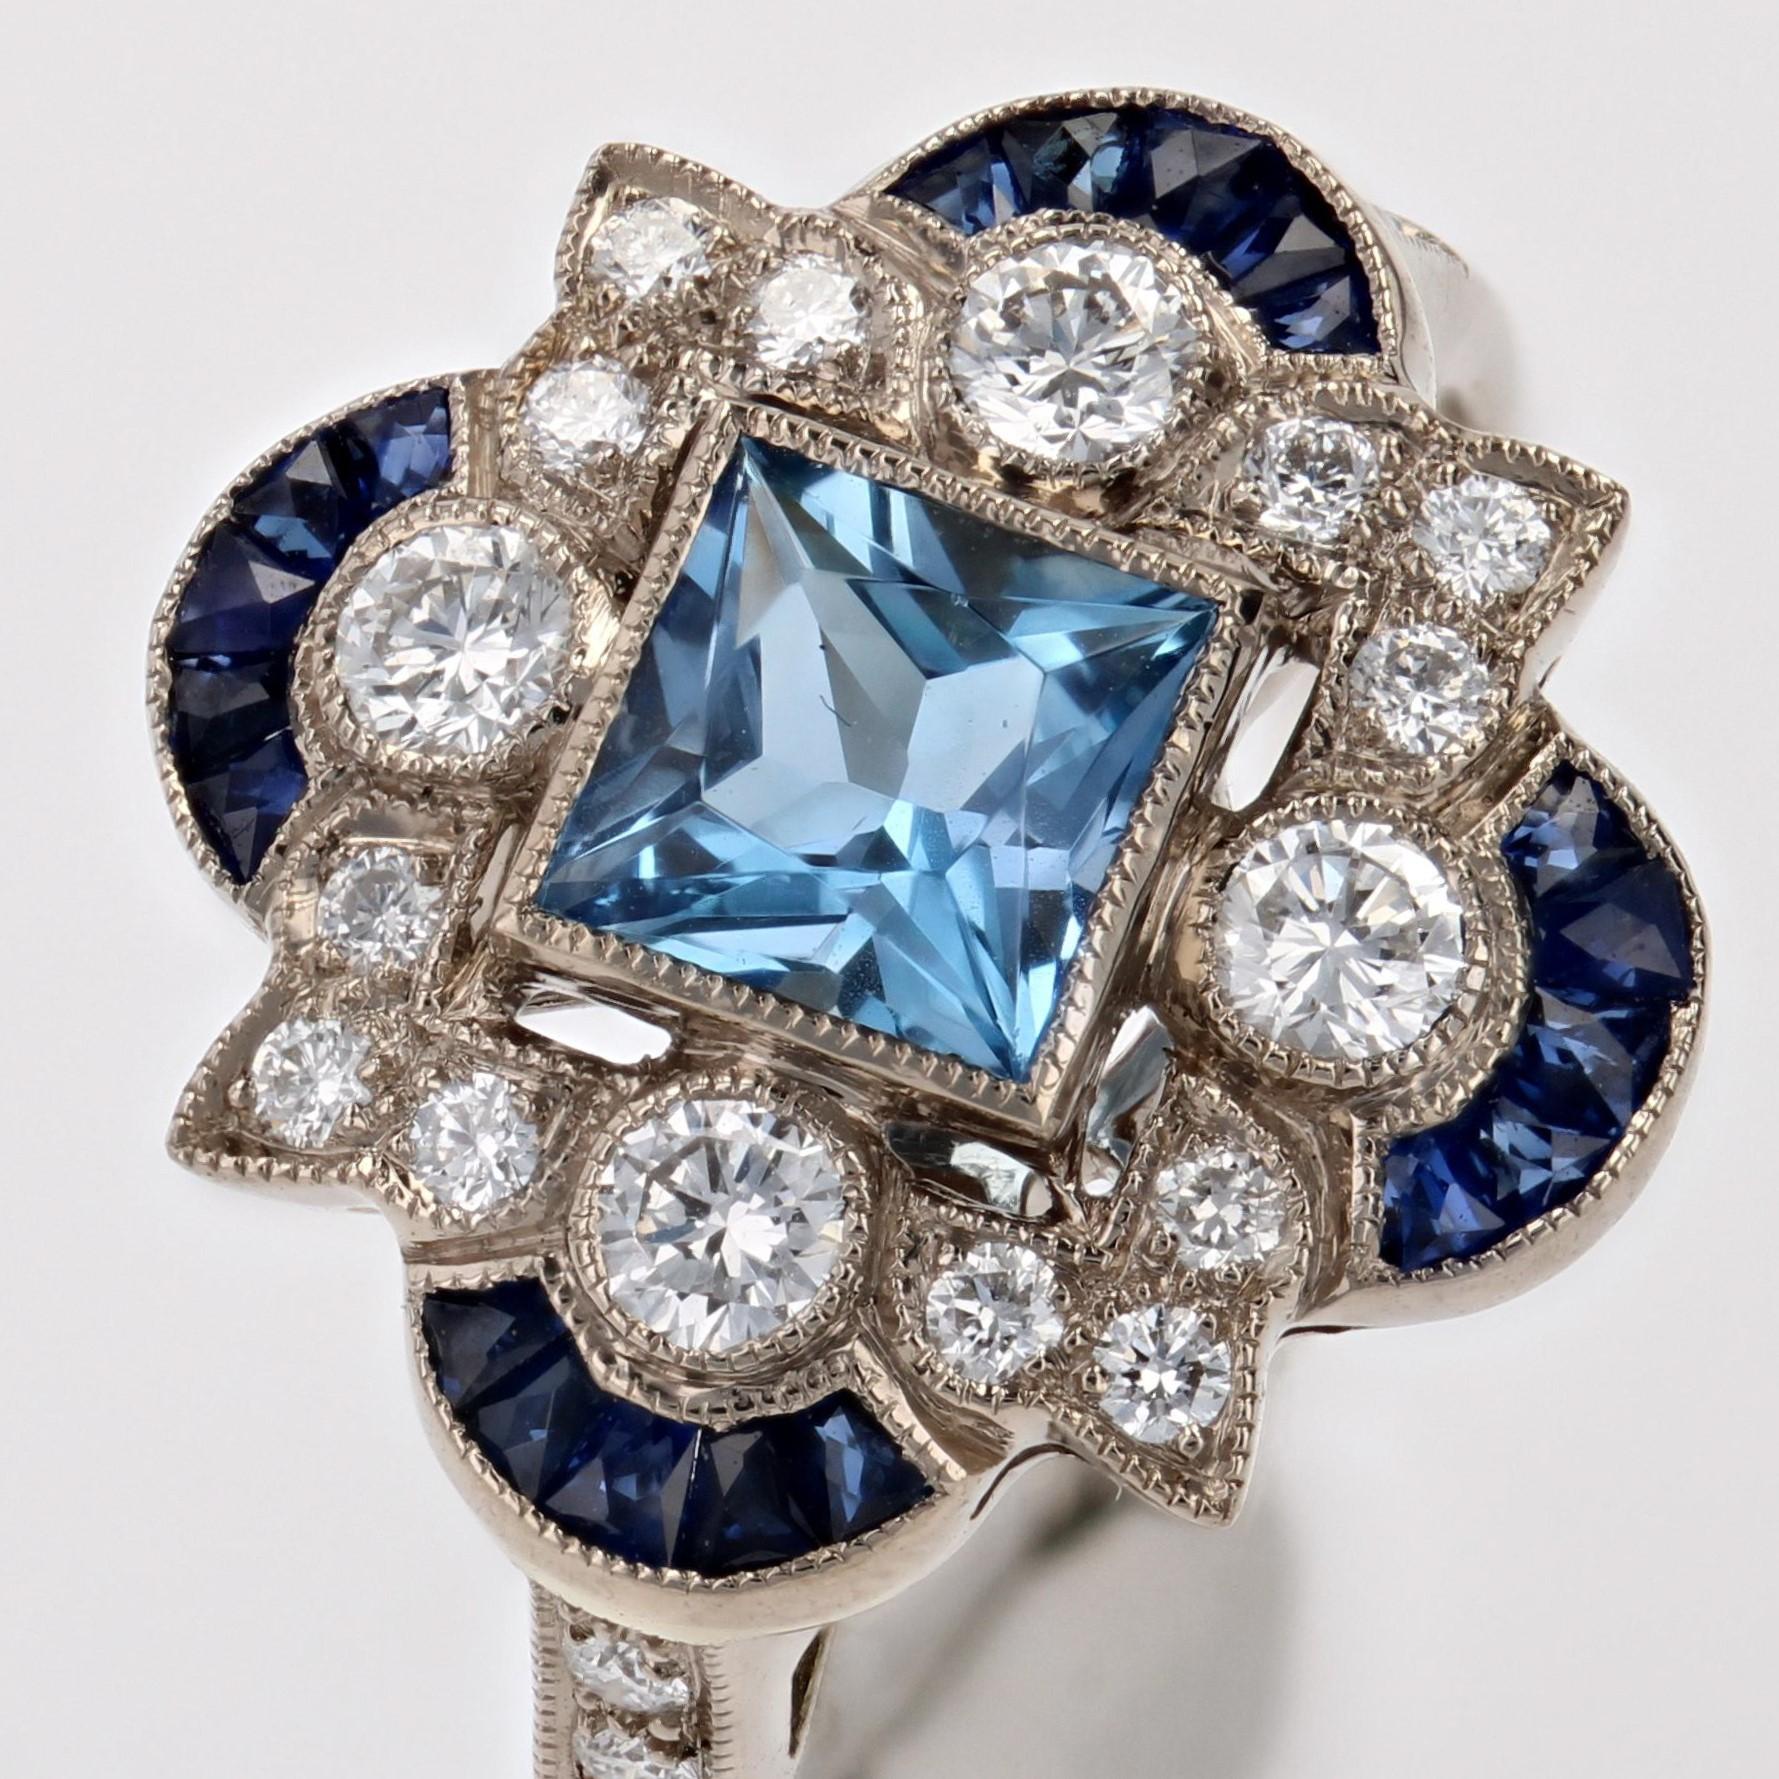 New Art Deco Style Aquamarine Calibrated Sapphires Diamonds 18K White Gold Ring For Sale 4